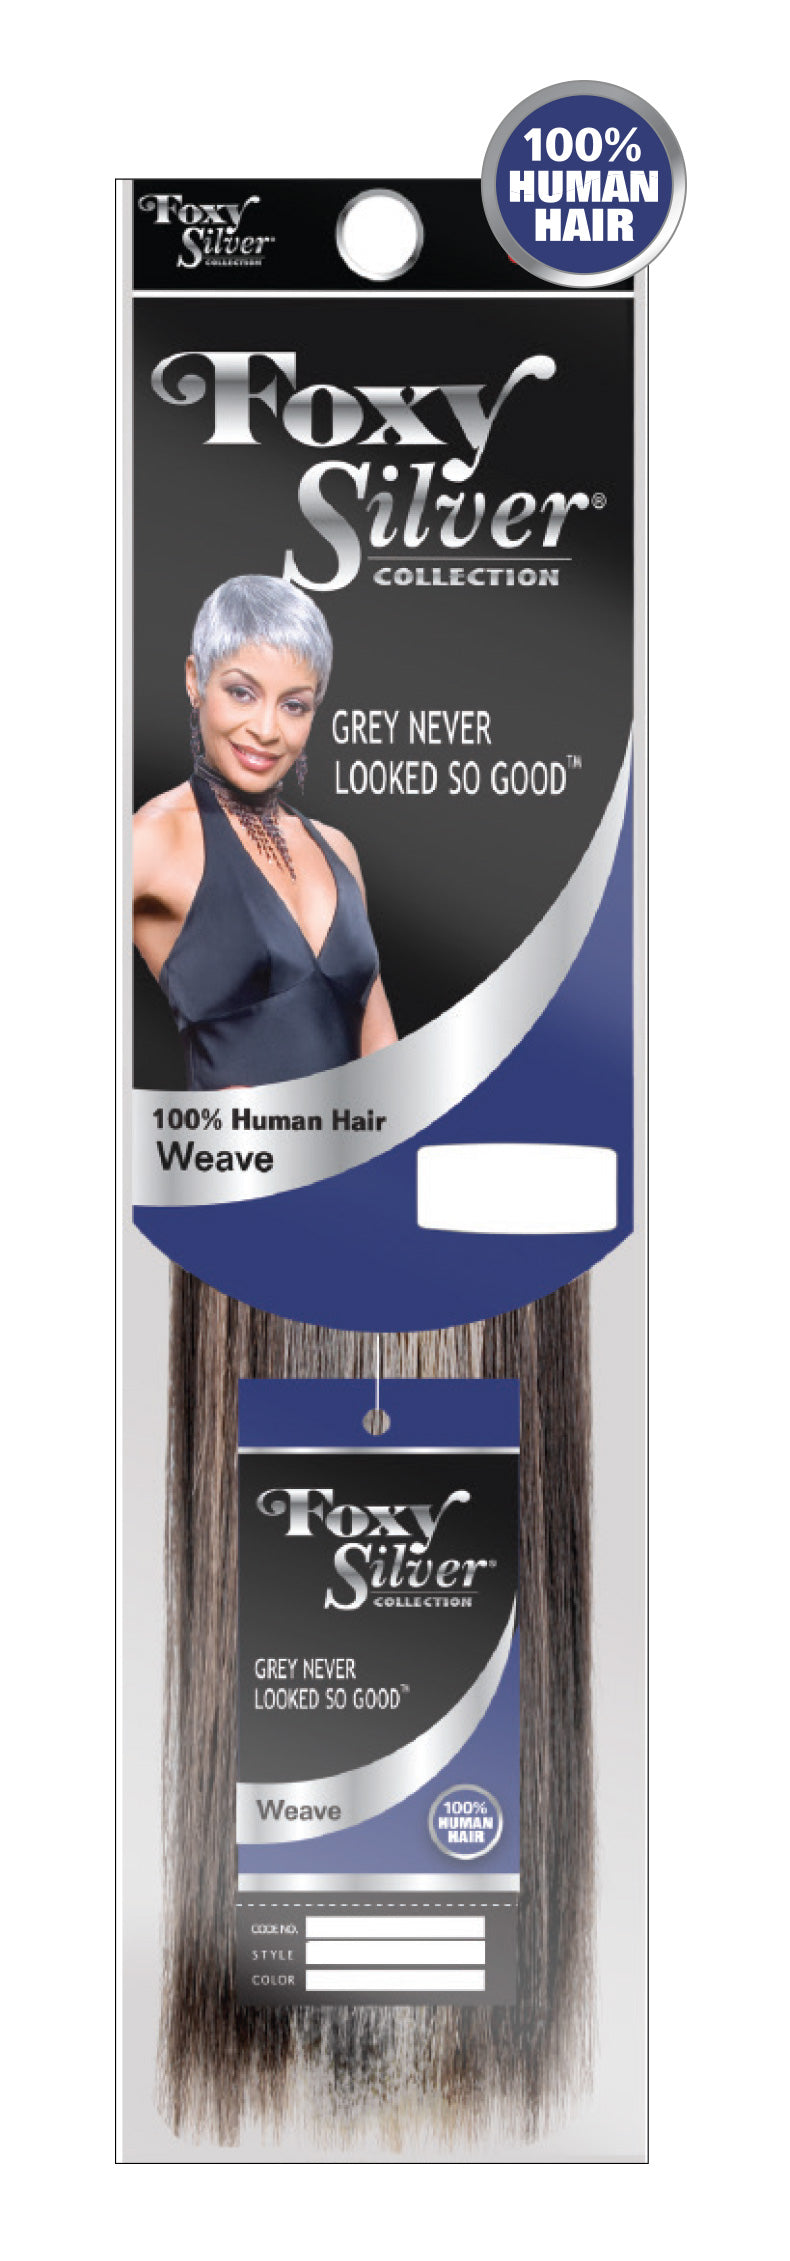 FOXY SILVER COLLECTION SALT AND PEPPER HUMAN HAIR EXTENSIONS